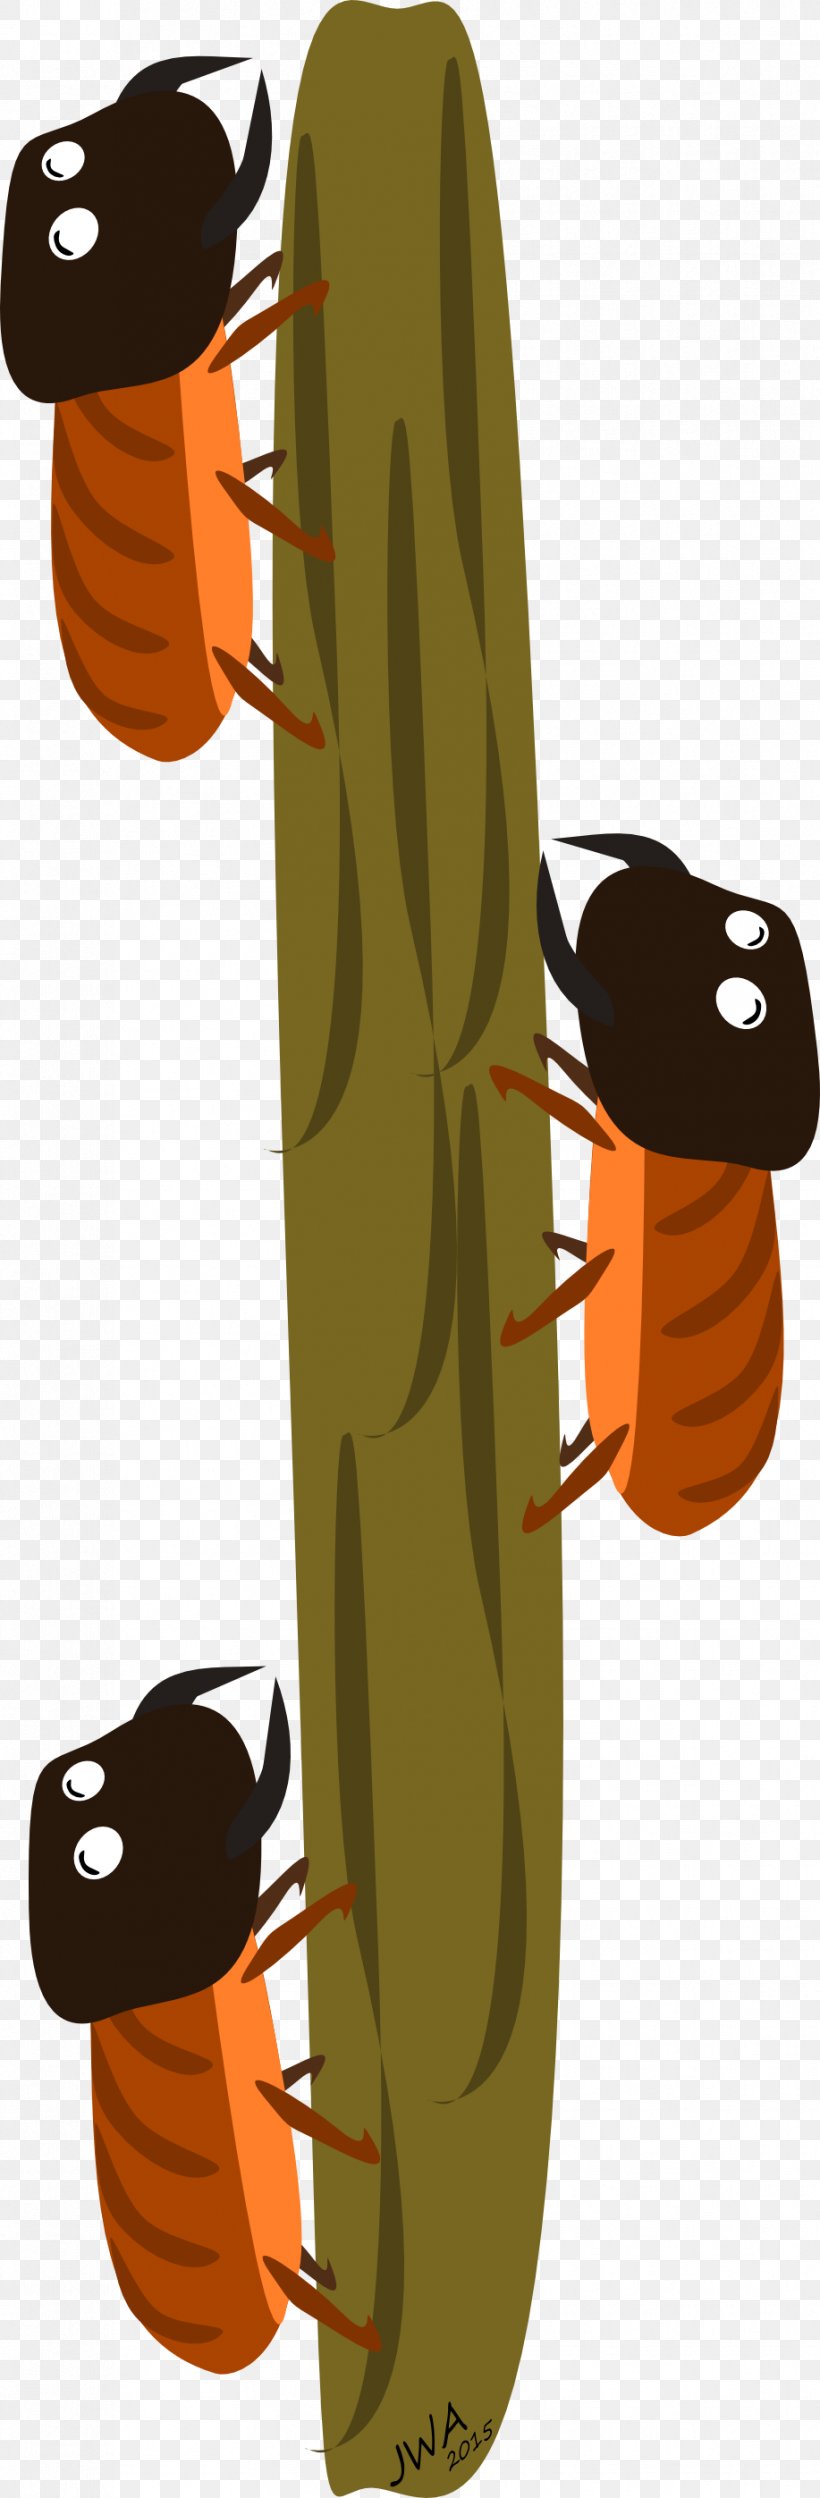 Mound-building Termites Ant Clip Art, PNG, 917x2794px, Termite, Ant, Cartoon, Flickr, Food Download Free